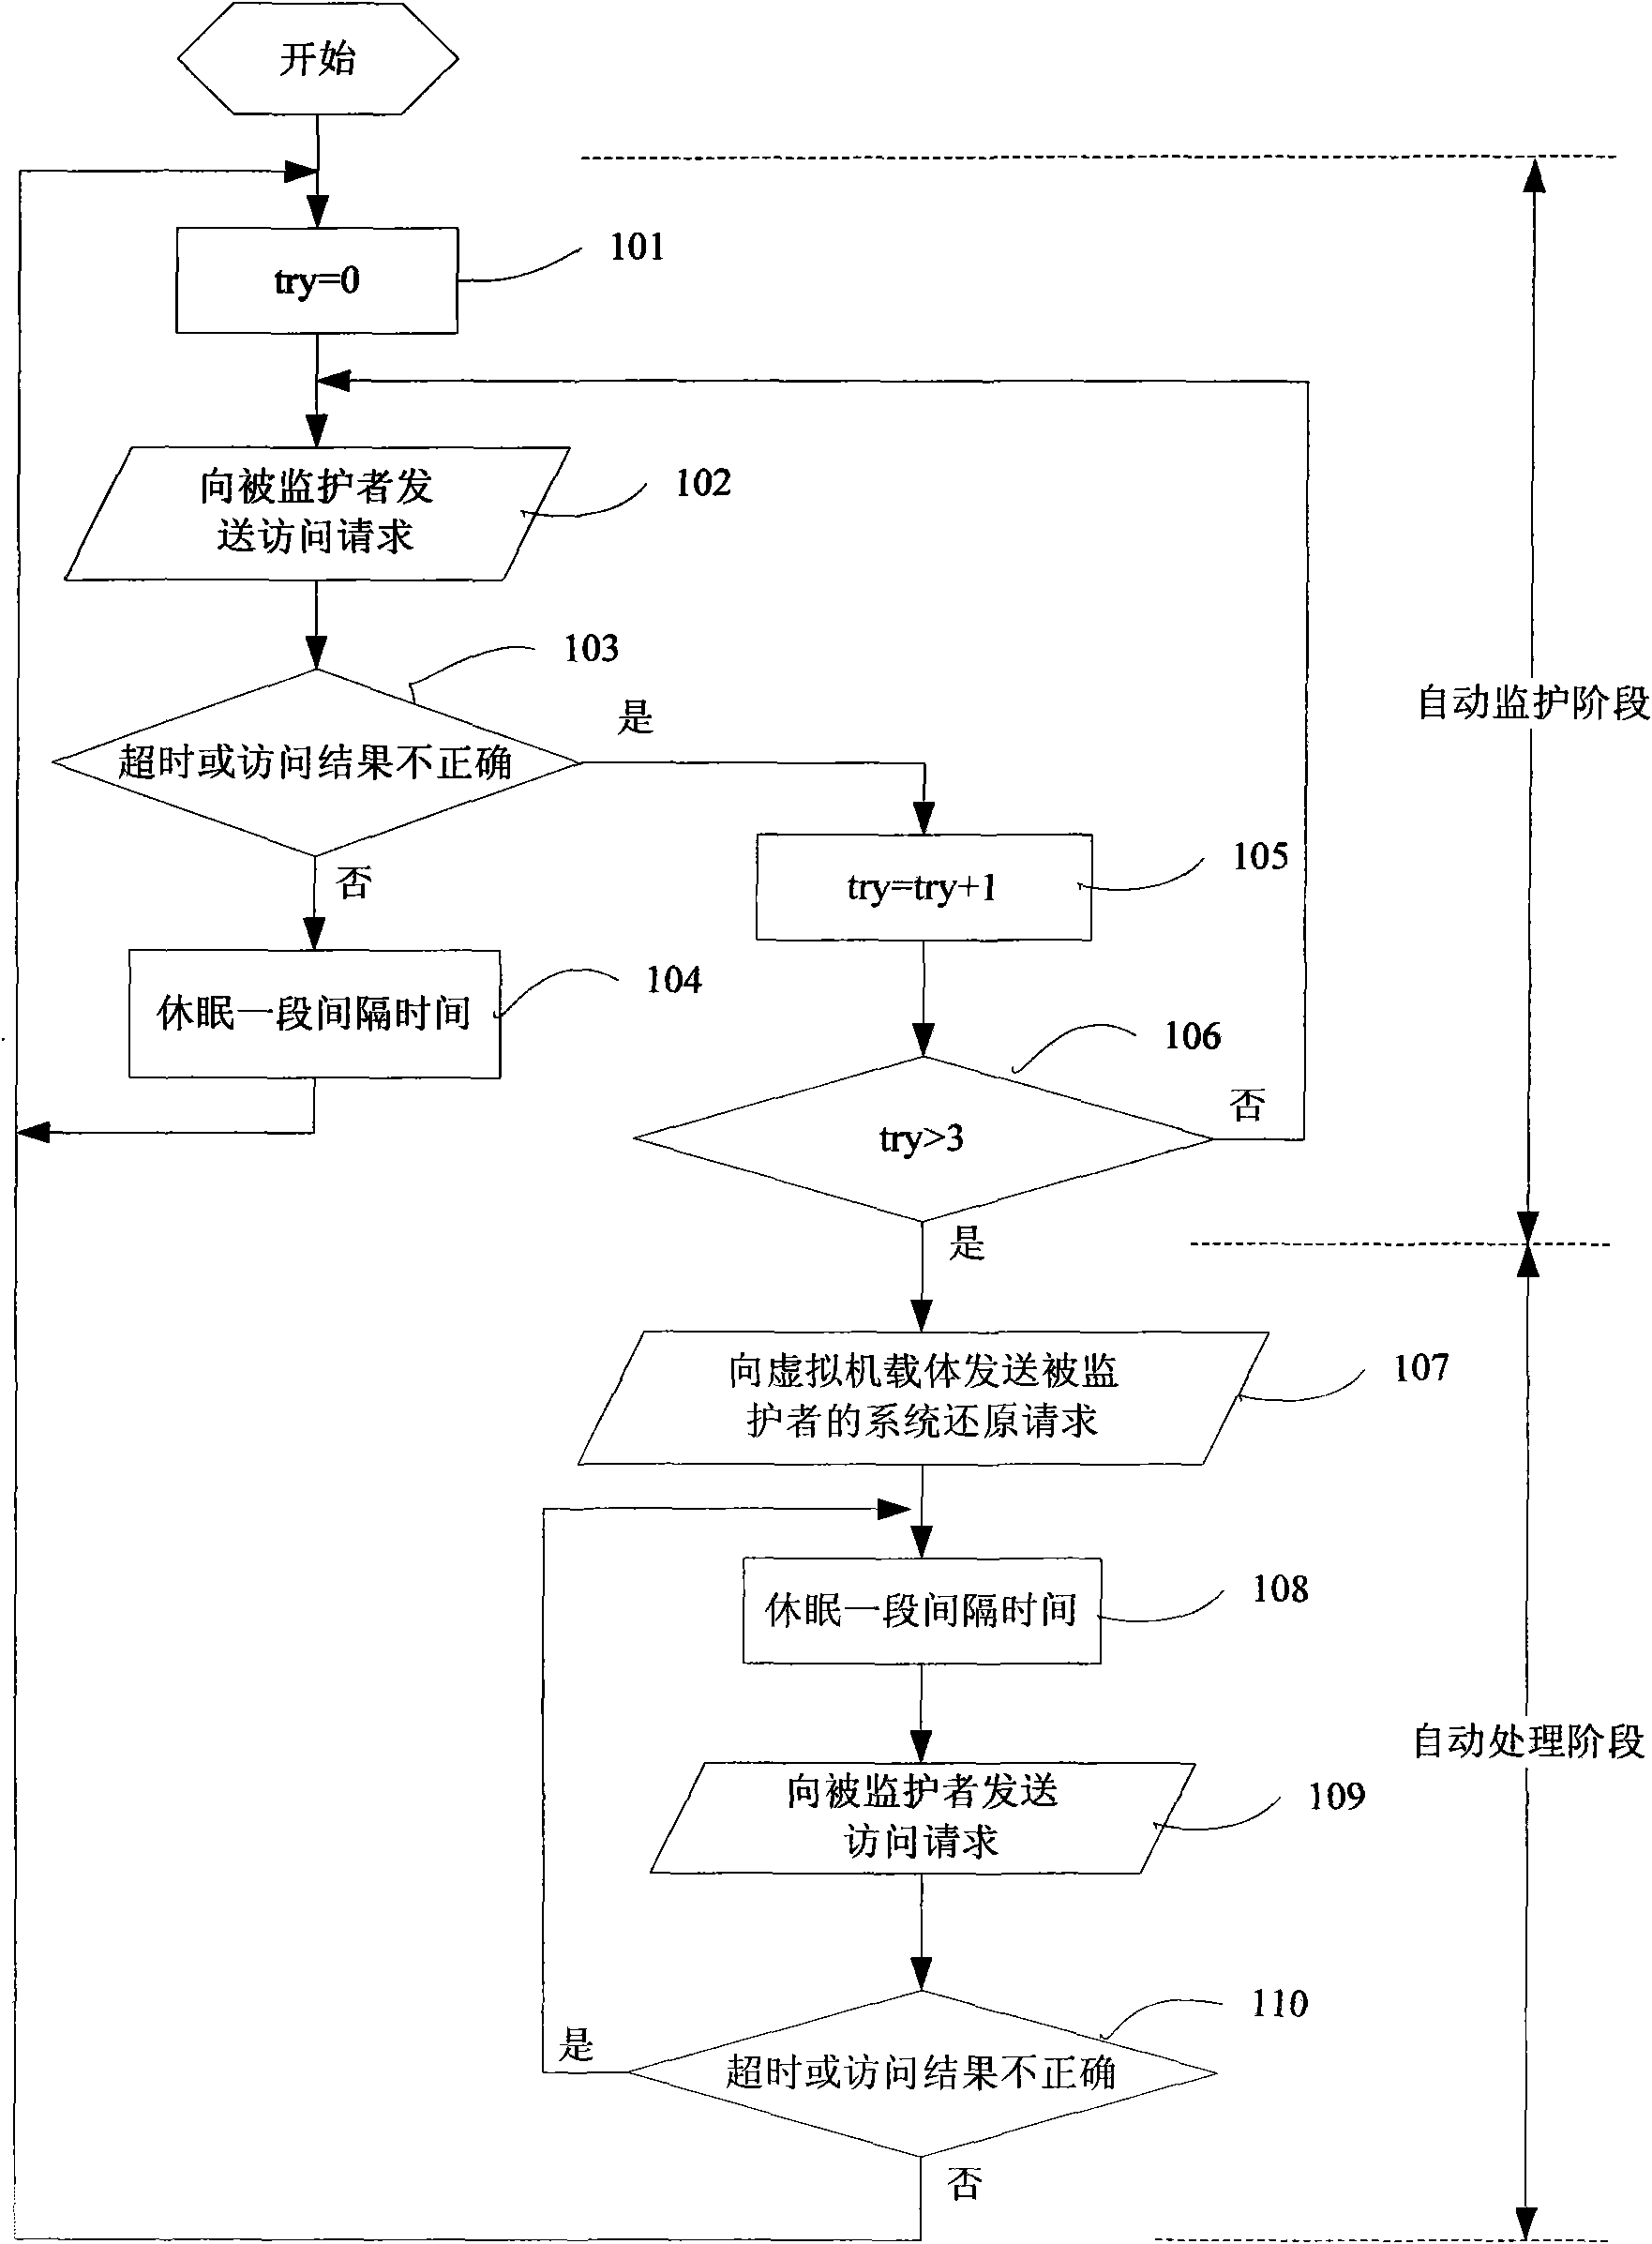 Automatic monitoring method and device for unattended system